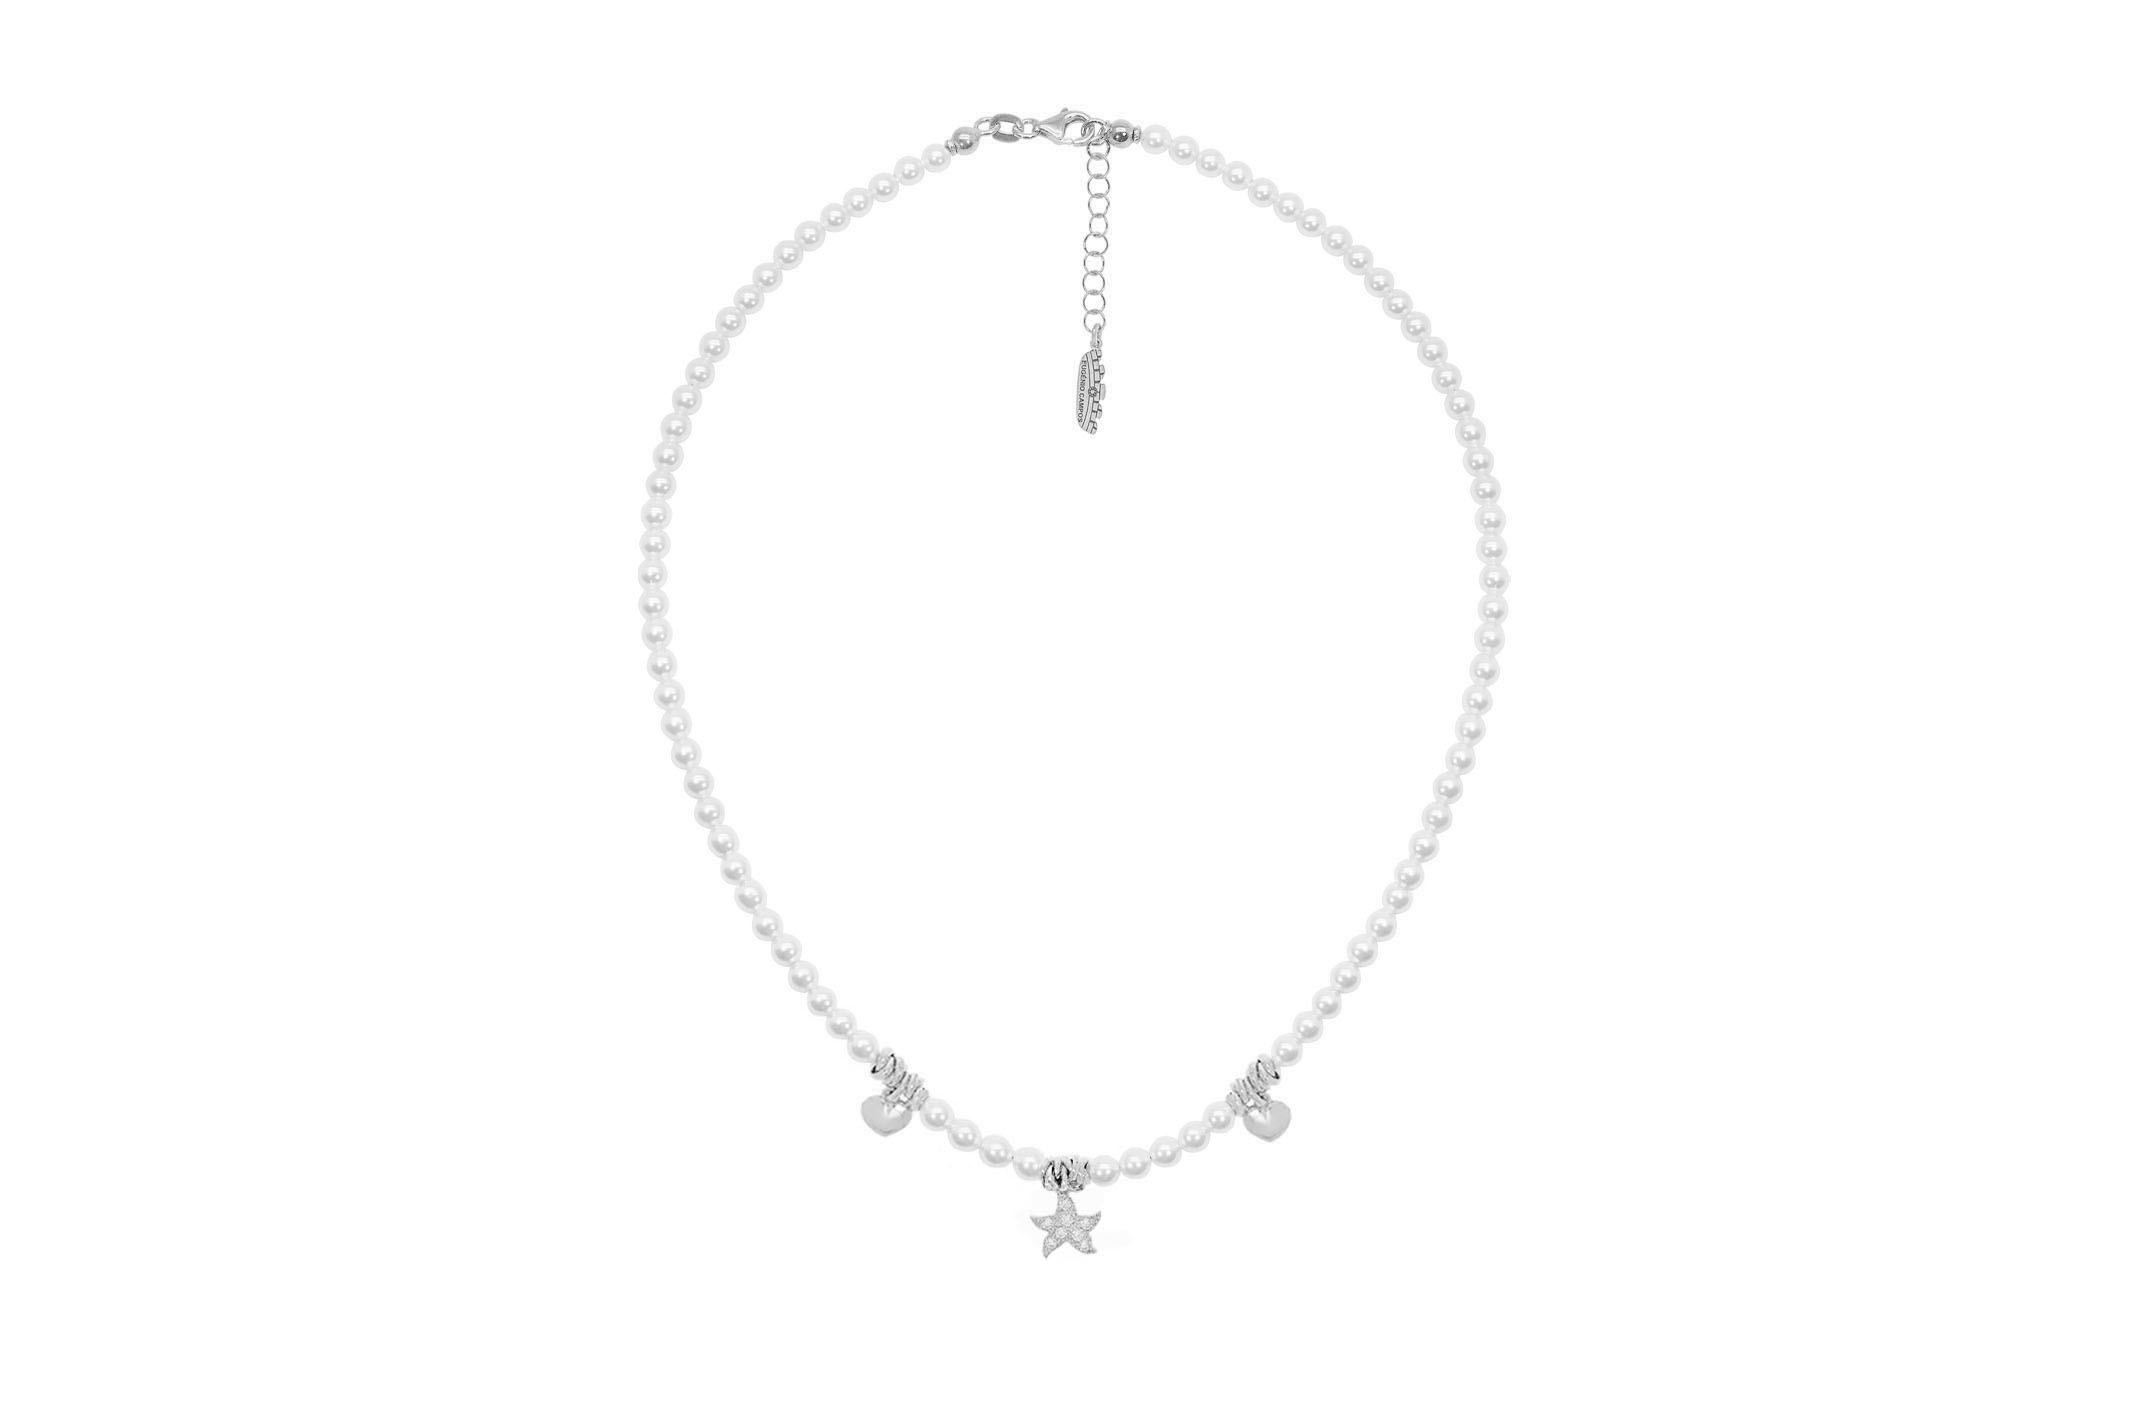 Jewel: necklace;Material: silver 925;Weight: 20.8 gr;Stone: pearl & zirconia;Color: white;Size: 40 cm + 4 cm;Pendent size: 0.5 cm